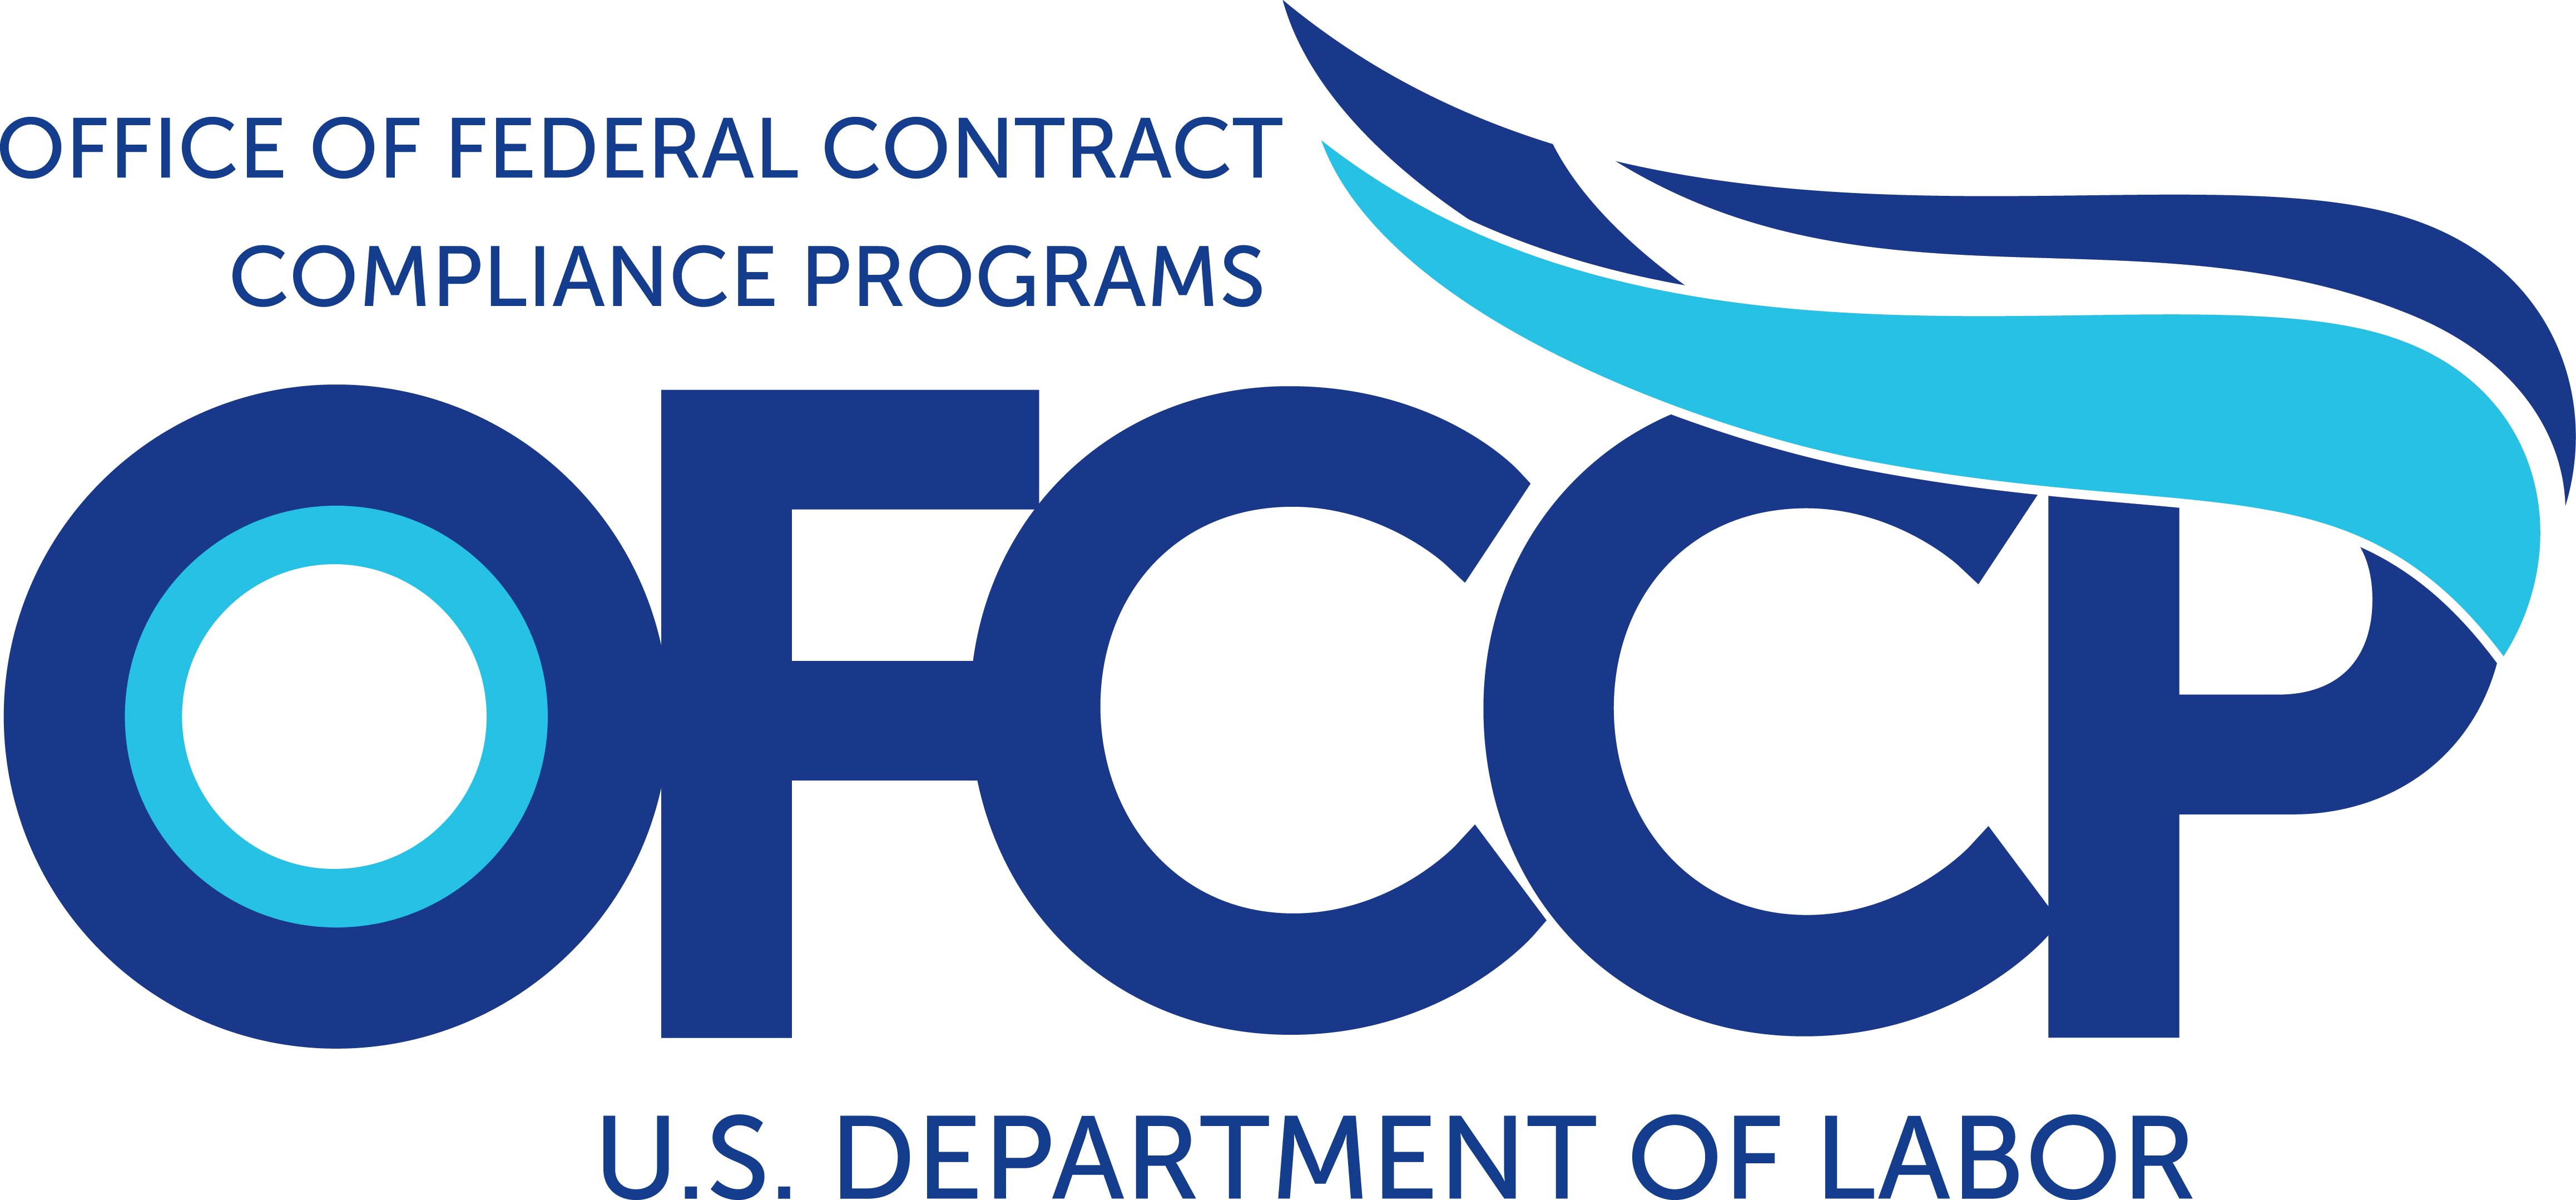 Office of federal contract compliance programs (OFCCP) US Department of Labor logo